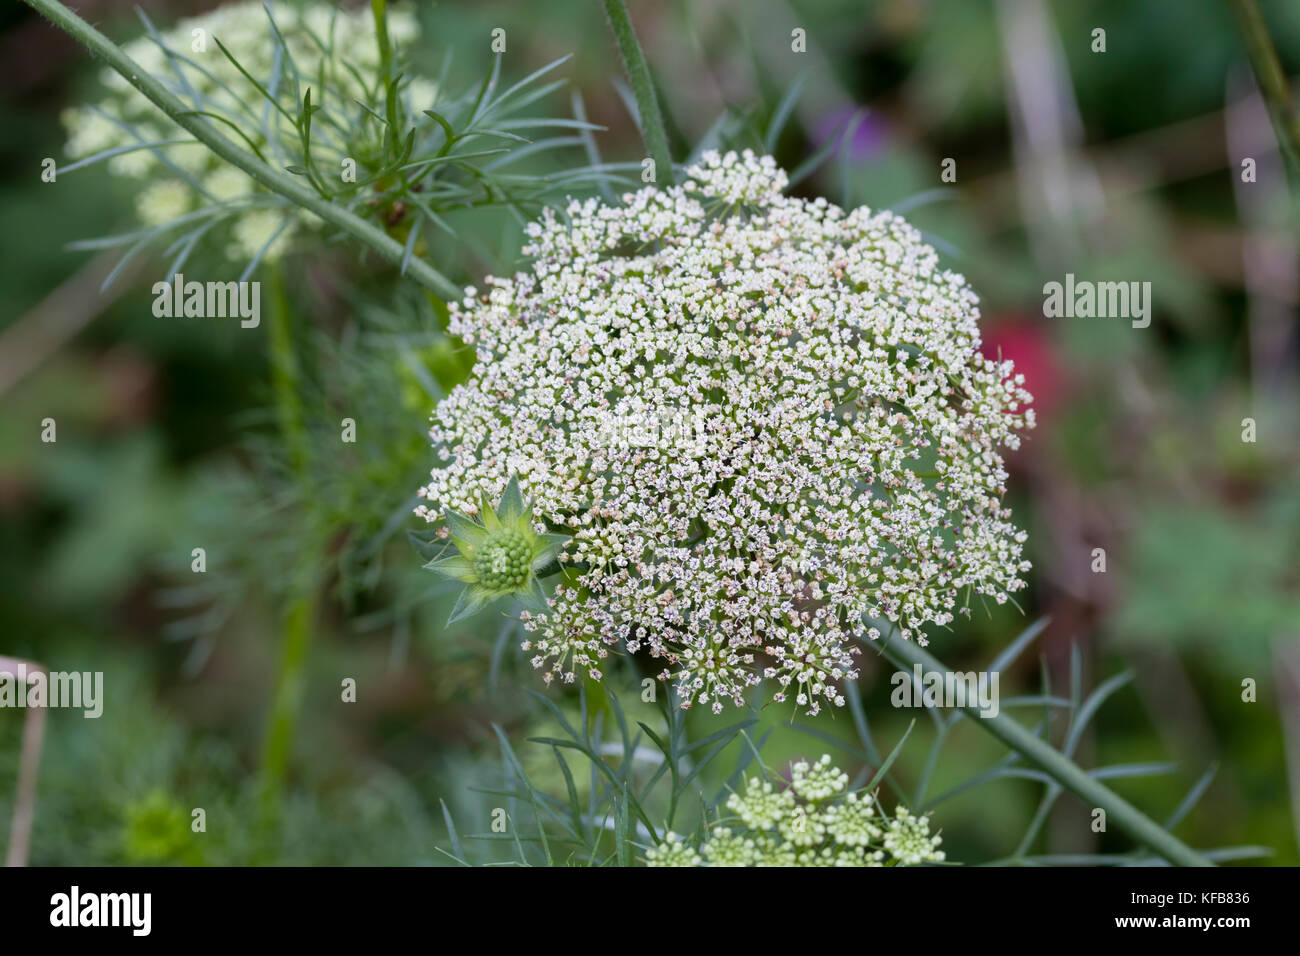 Feathery foliage and domed heads of green and white flowers of the hardy annual umbellifer, Ammi visnaga Stock Photo